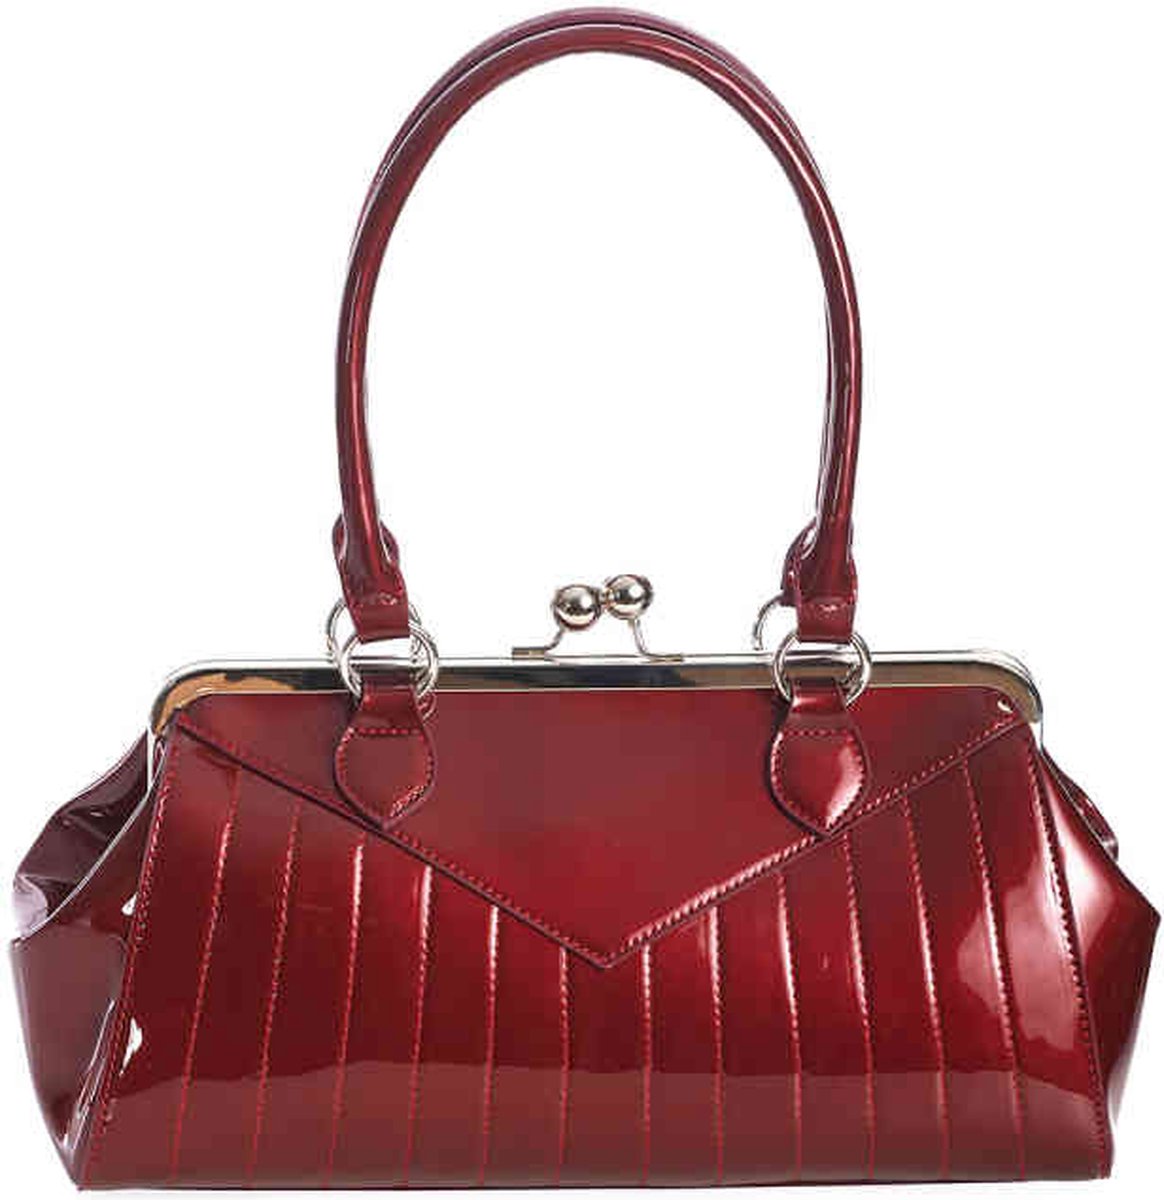 Banned - Maggie May Handtas - Bordeaux rood